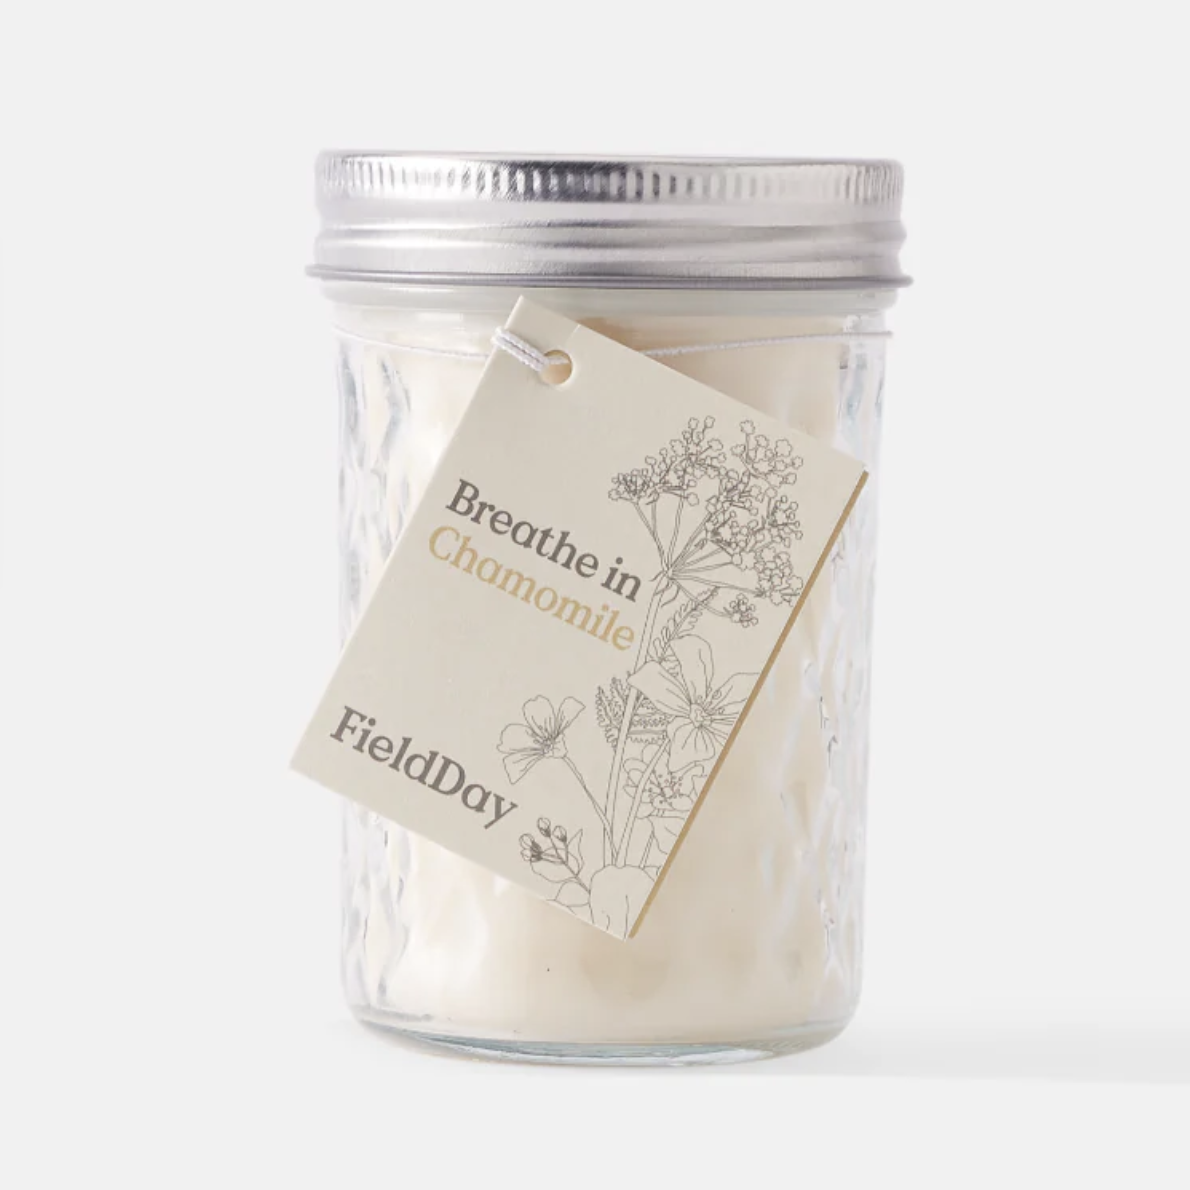 2129-field-day-chamomile-candle-17187852415638.png